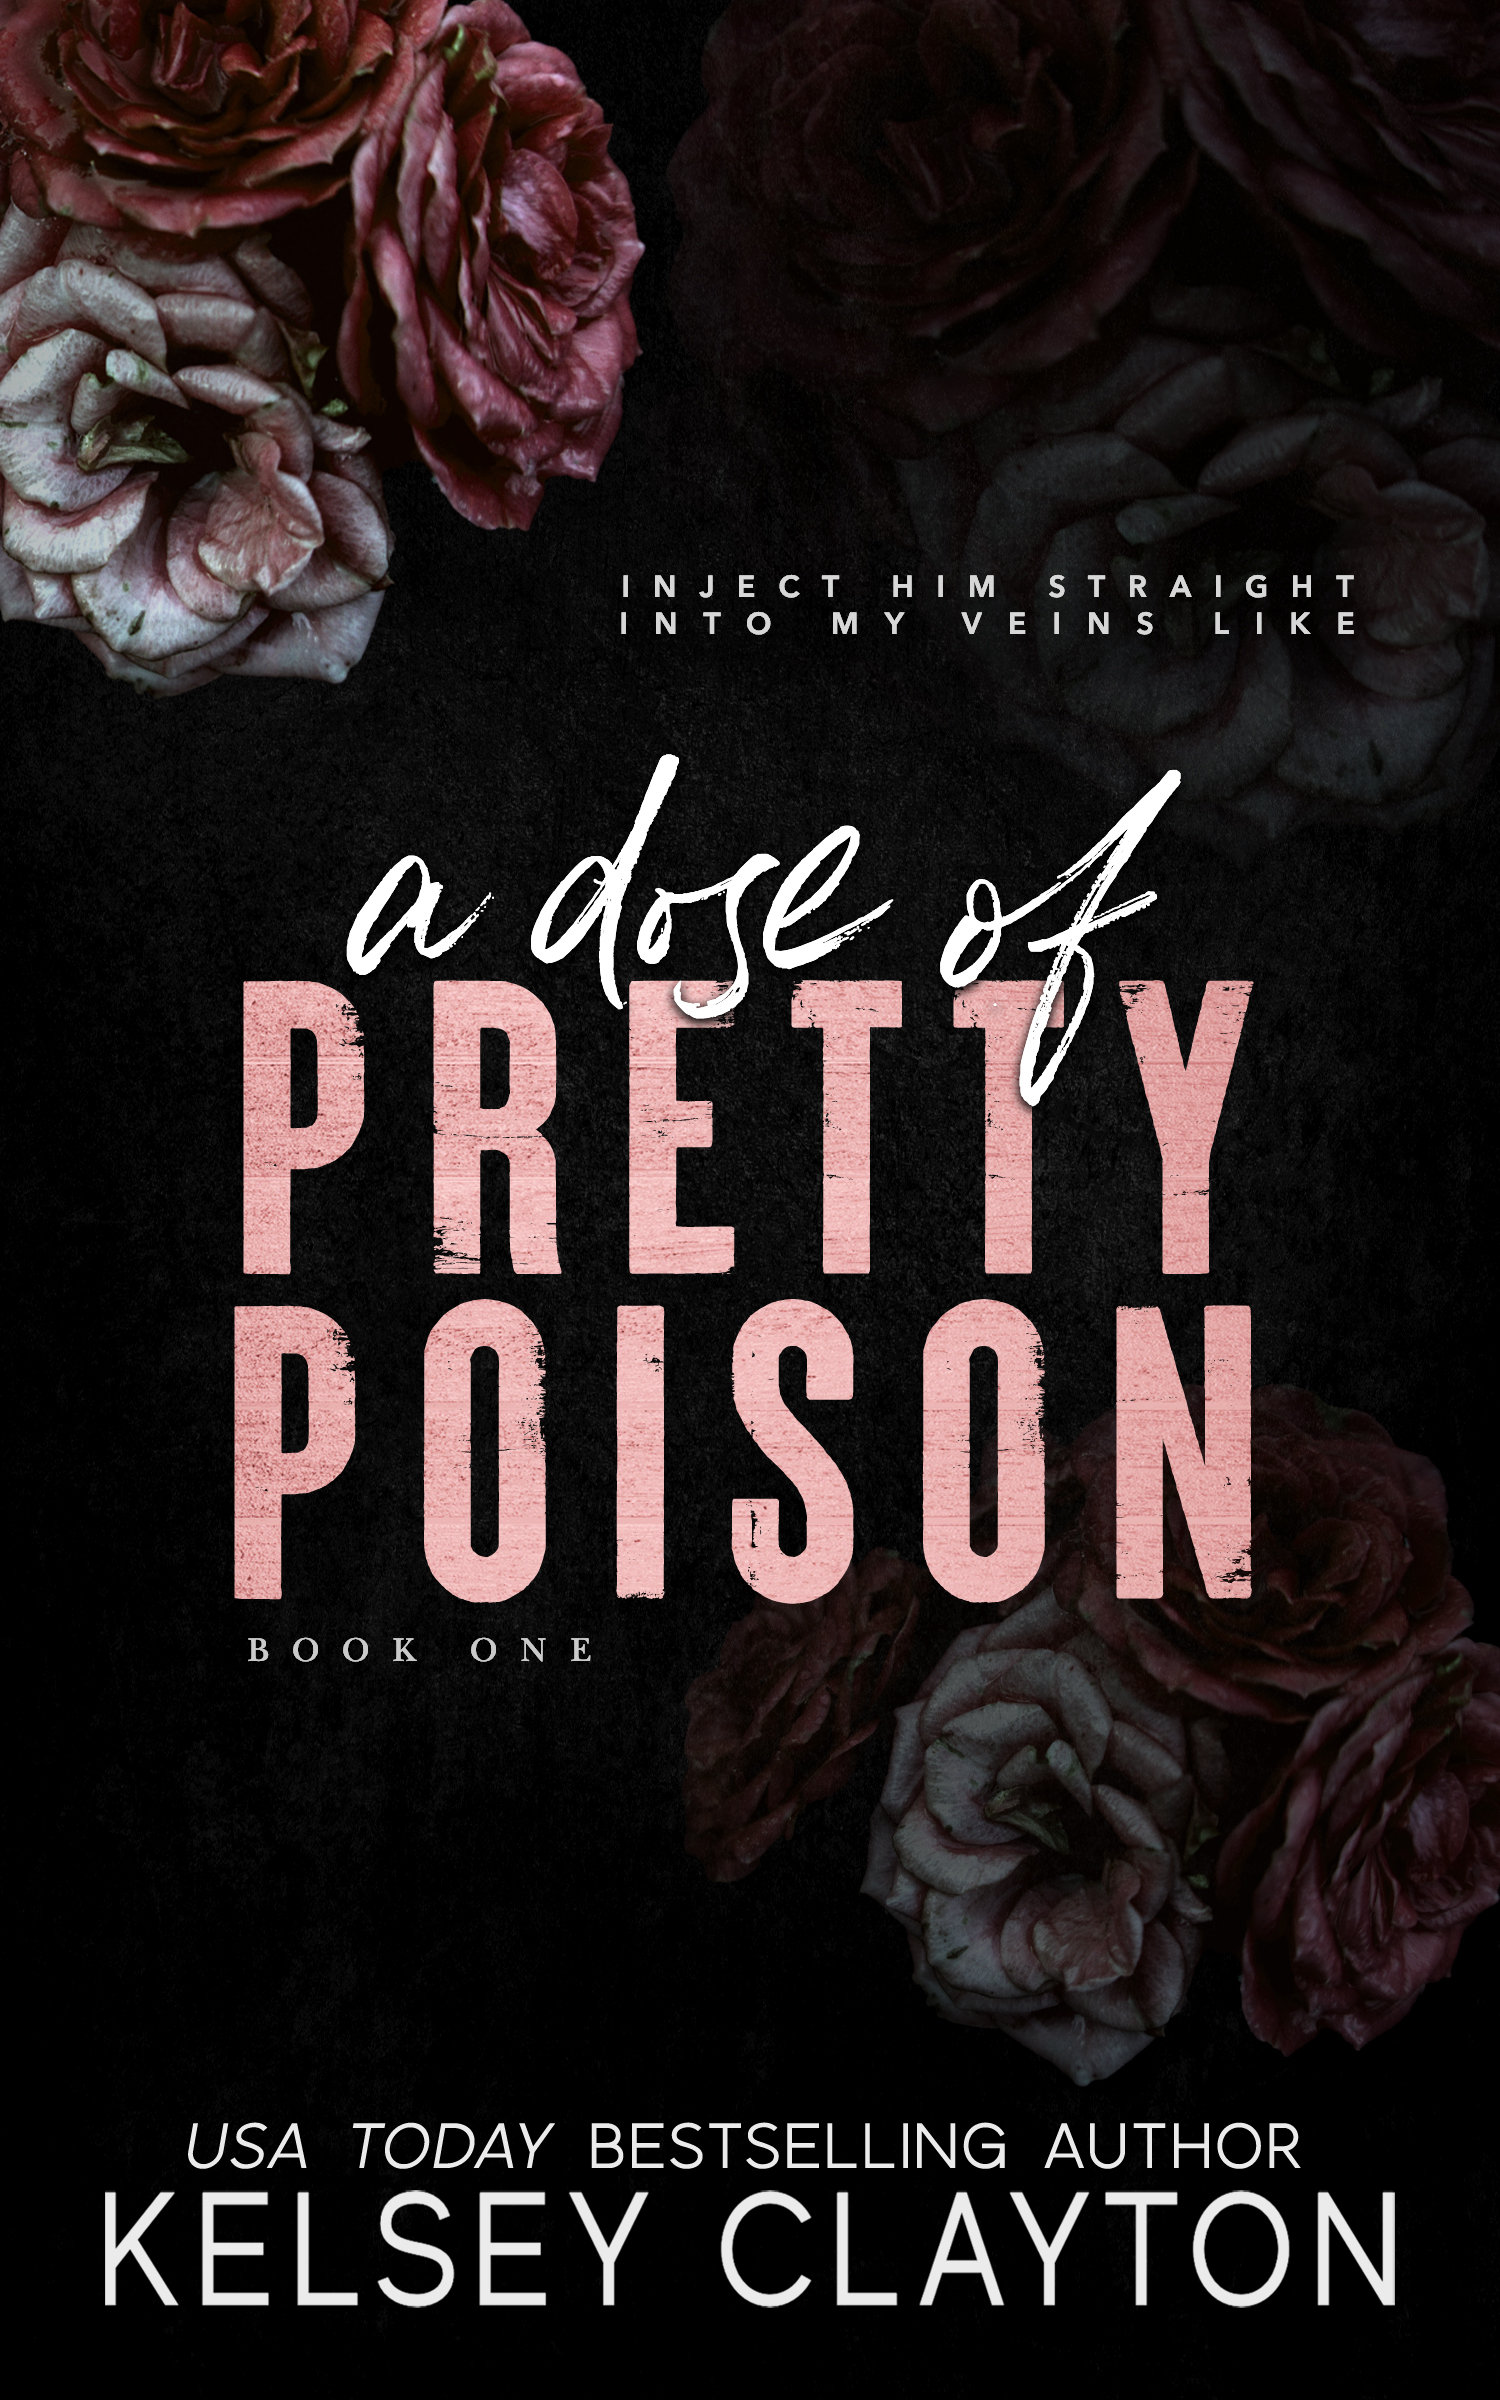 A Dose of Pretty Poison by Kelsey Clayton PDF Download